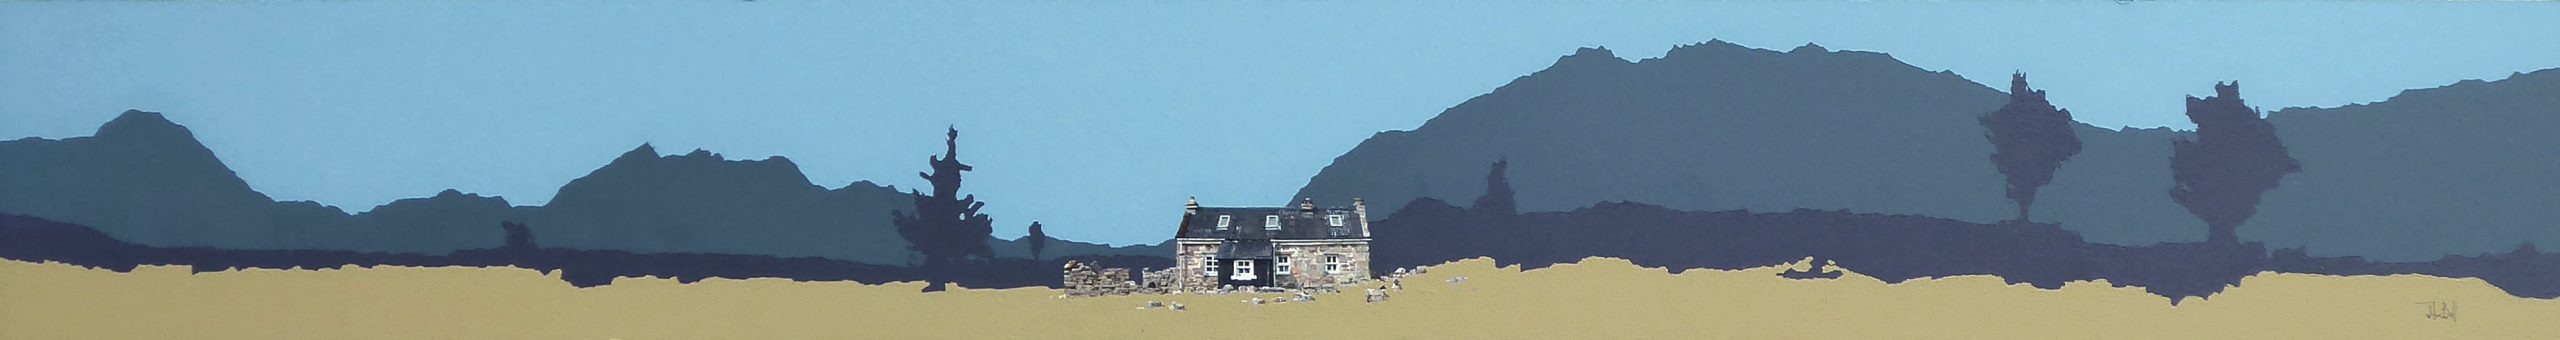 Shenavall20Bothy2C20Fisherfield20Forest2028size20820x206020inches29-scaled